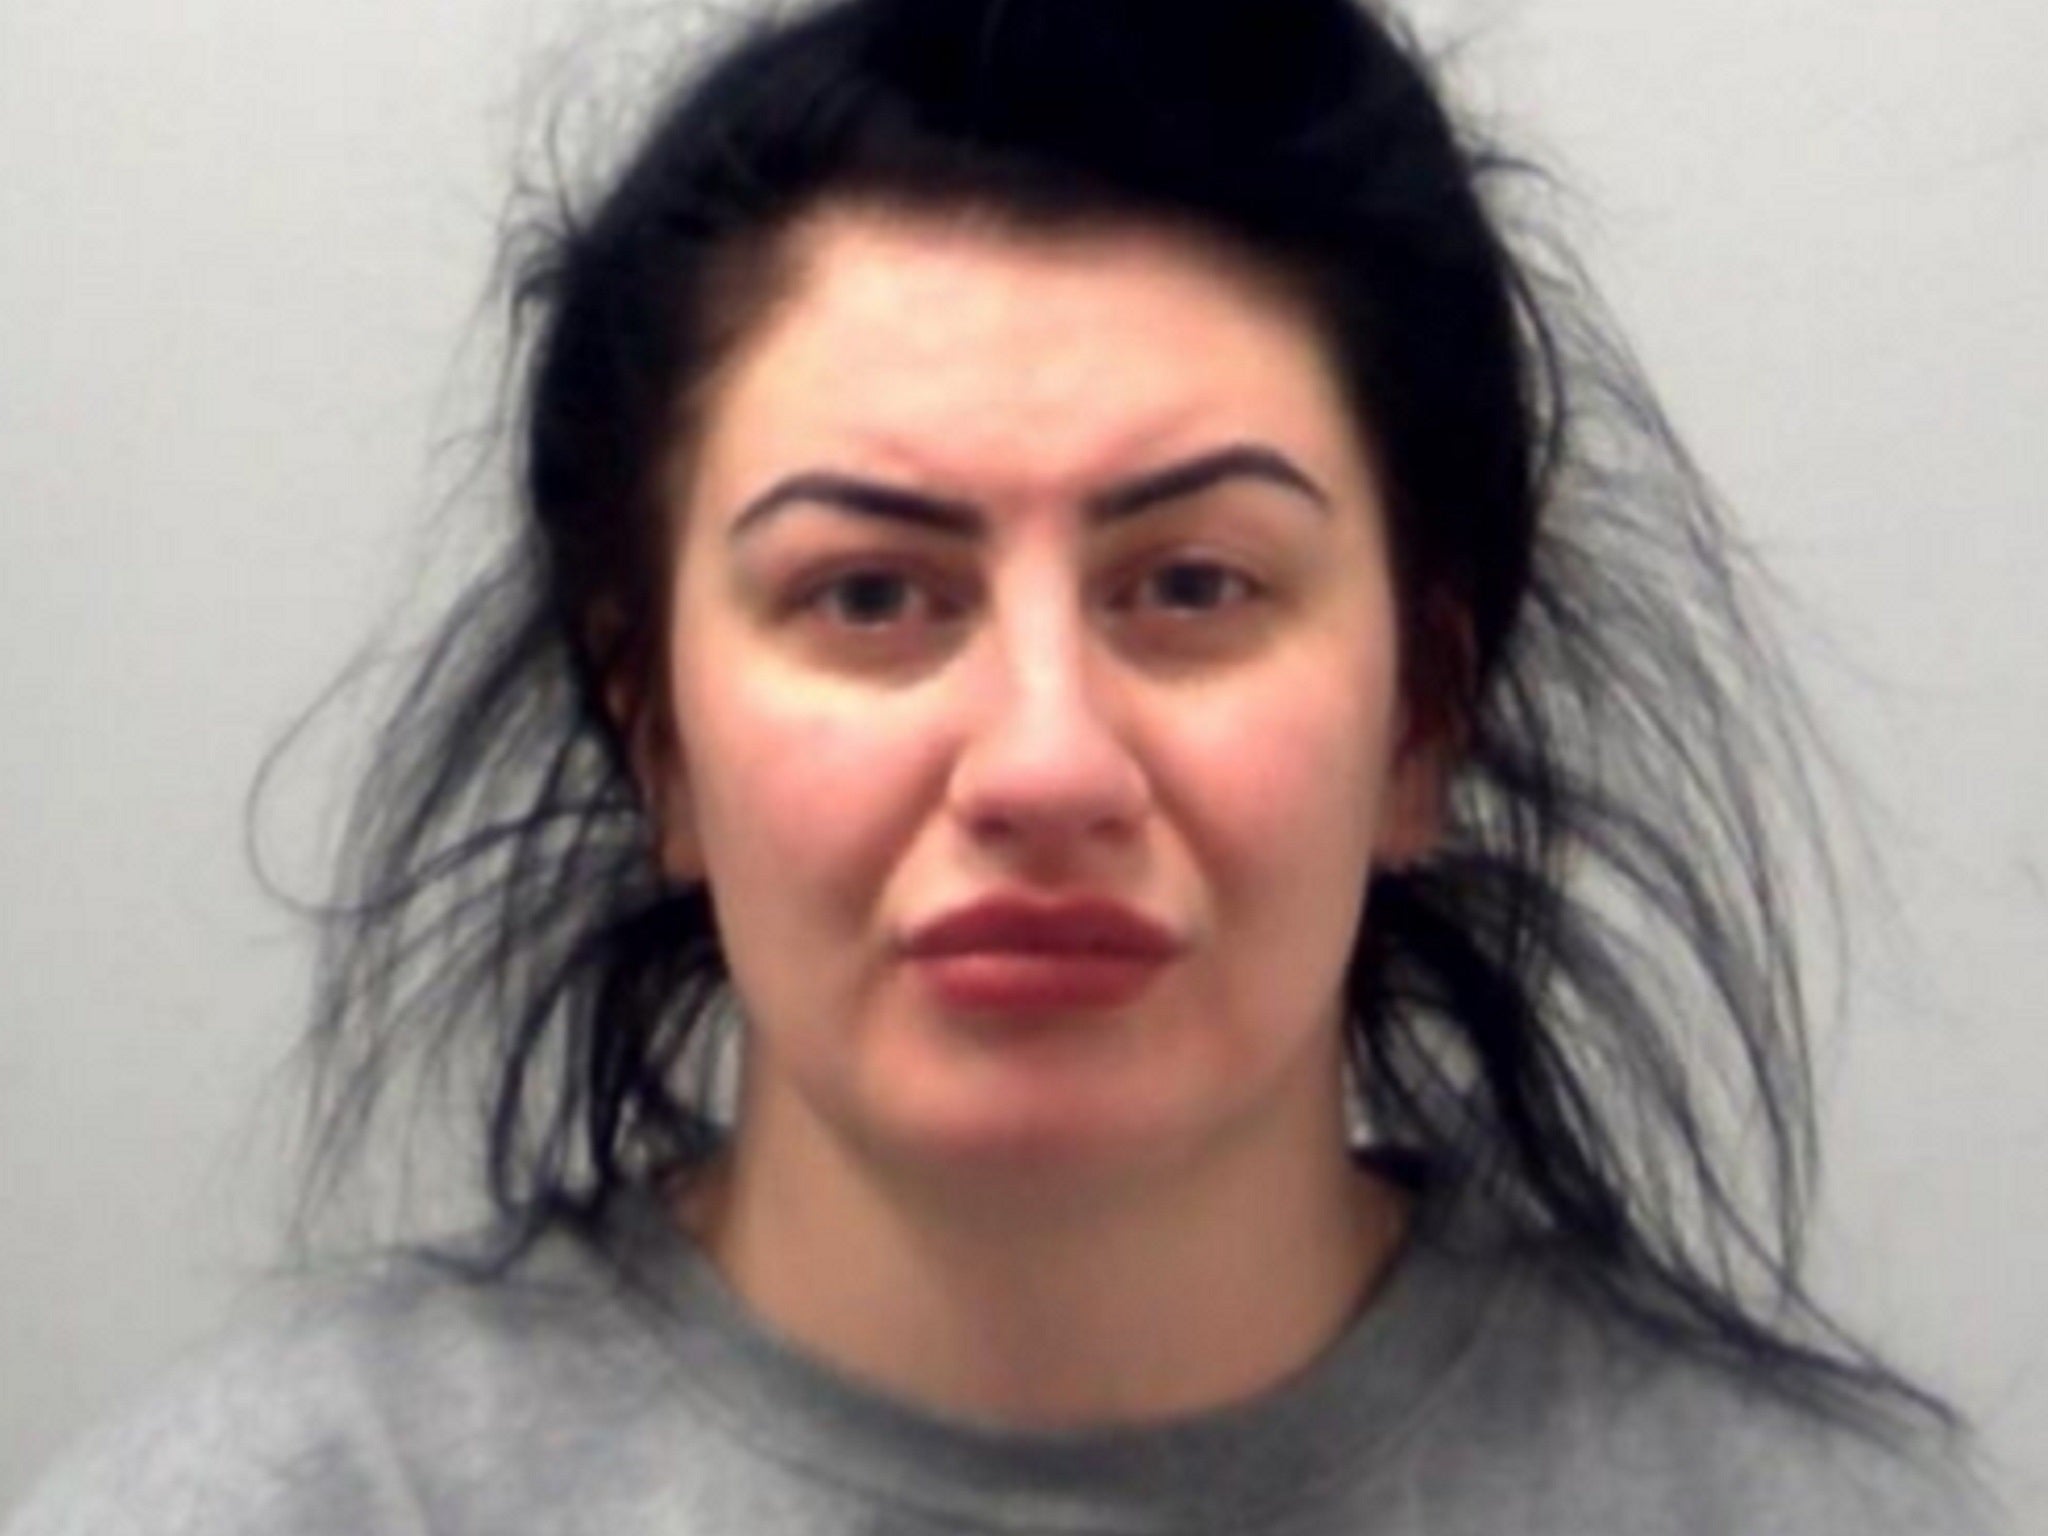 Pregnant woman jailed for life after stabbing boyfriend to death at New Years party The Independent pic